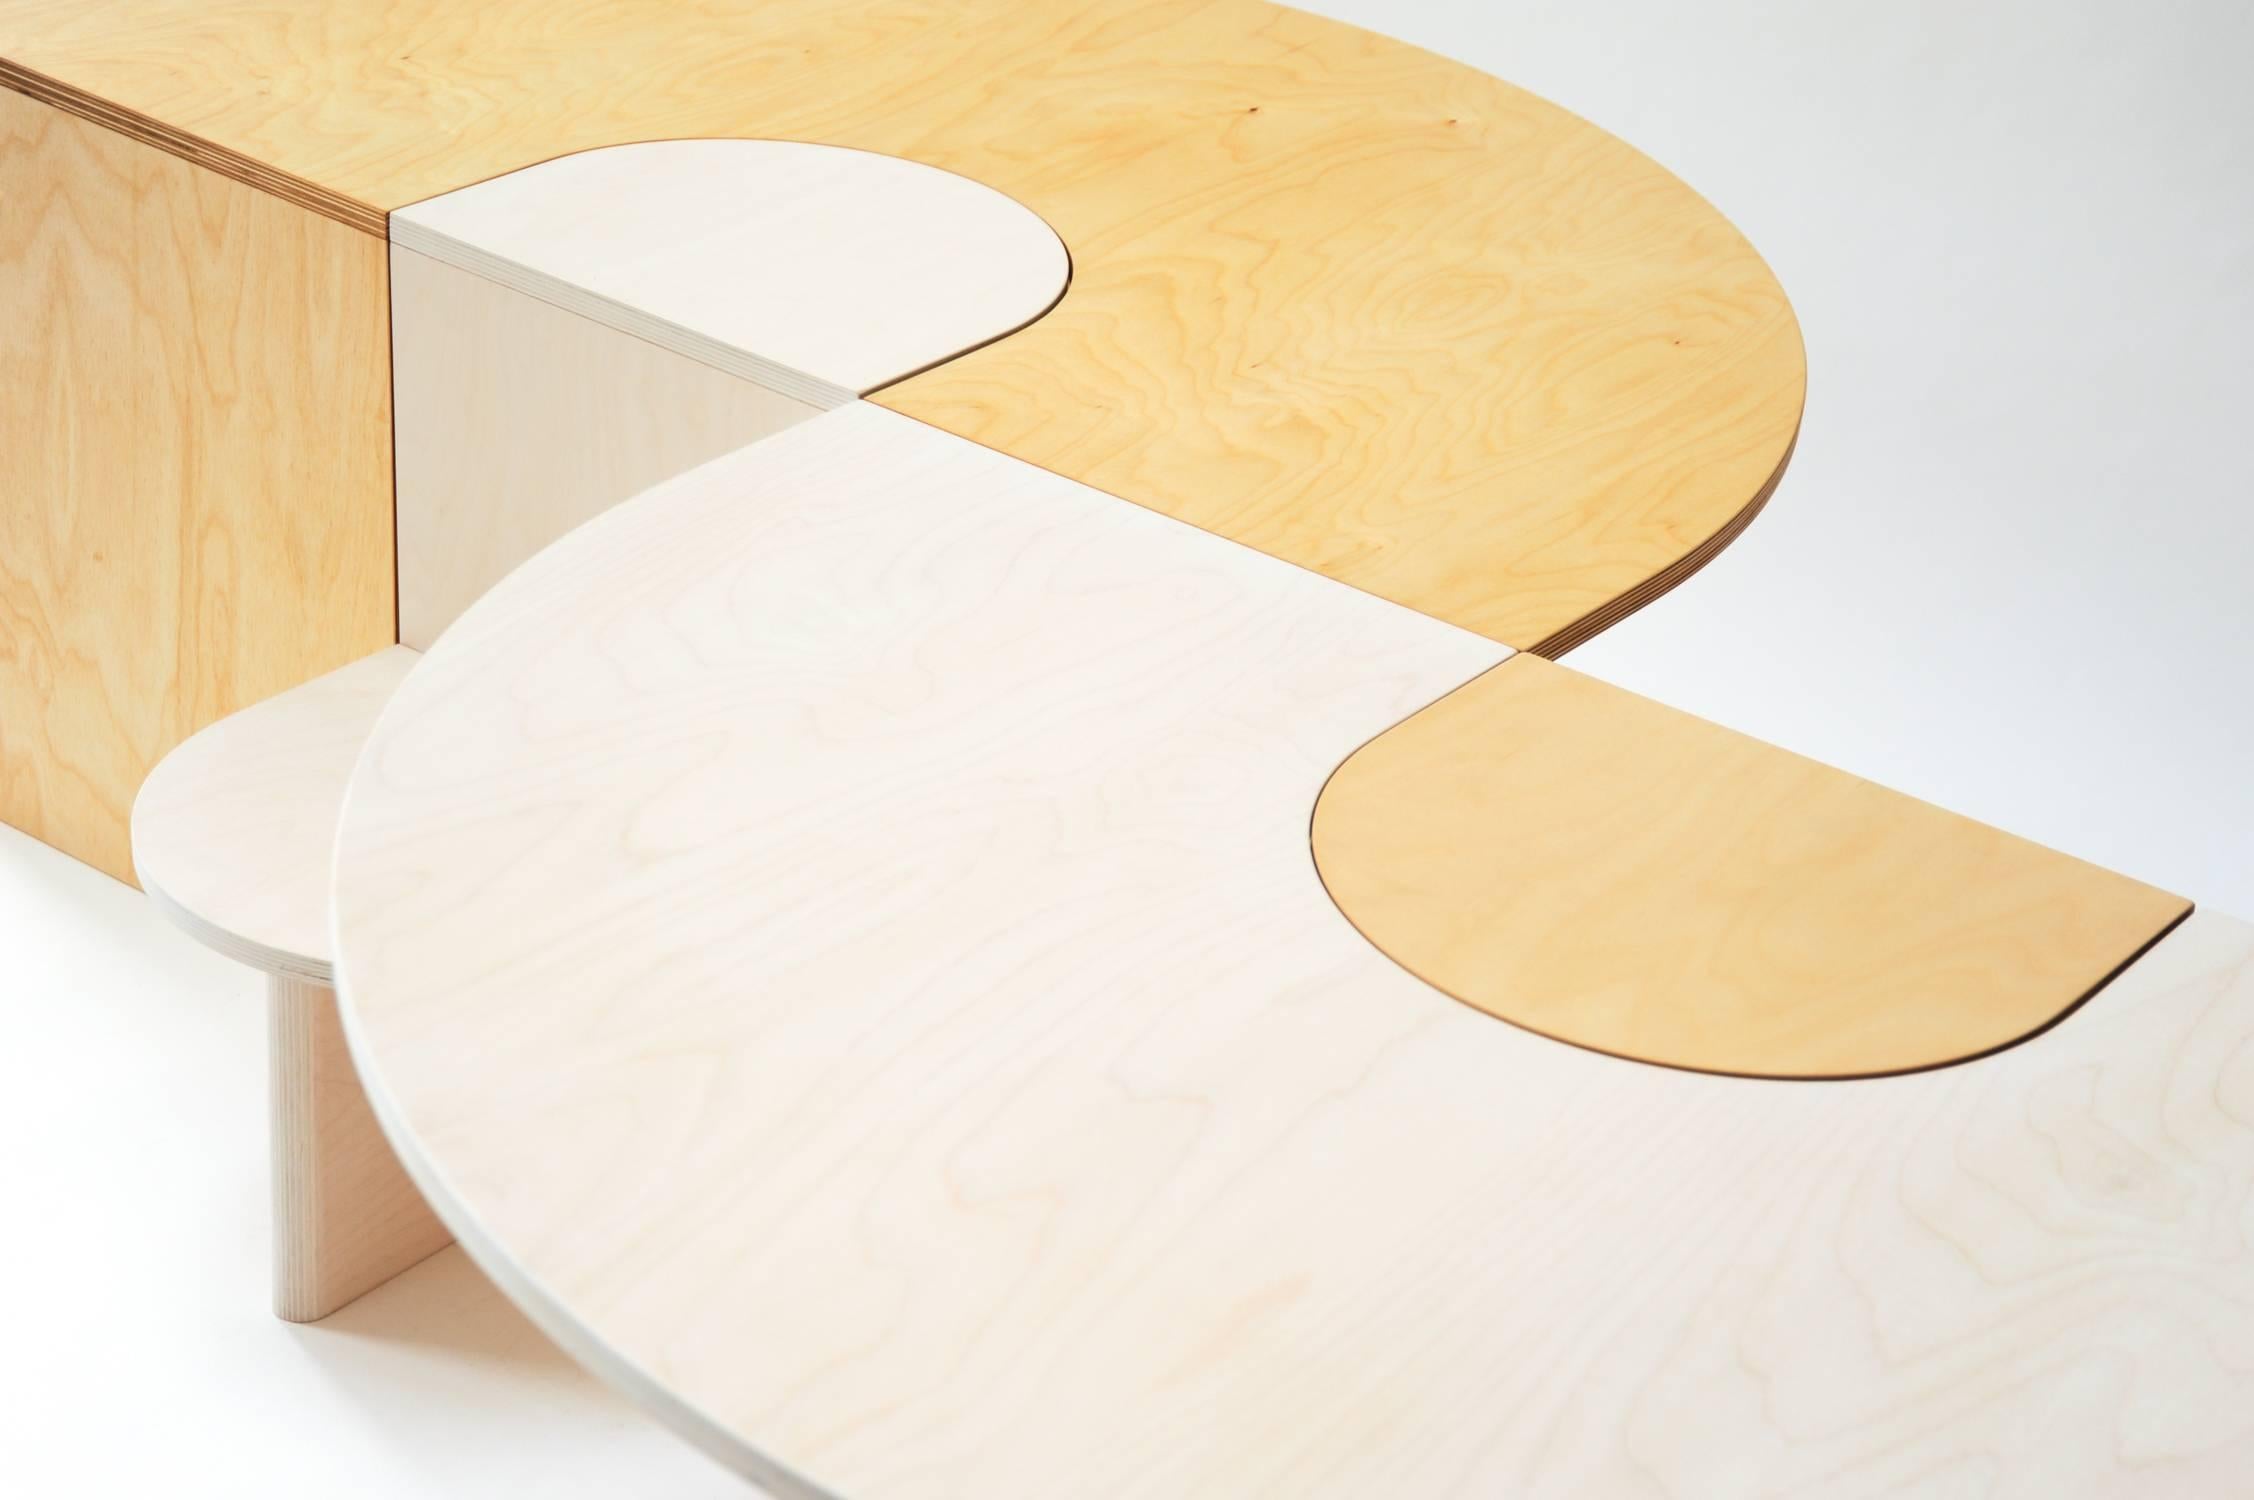 Contemporary Lunar Table by Kinder Modern in Birch Plywood, USA, 2017 For Sale